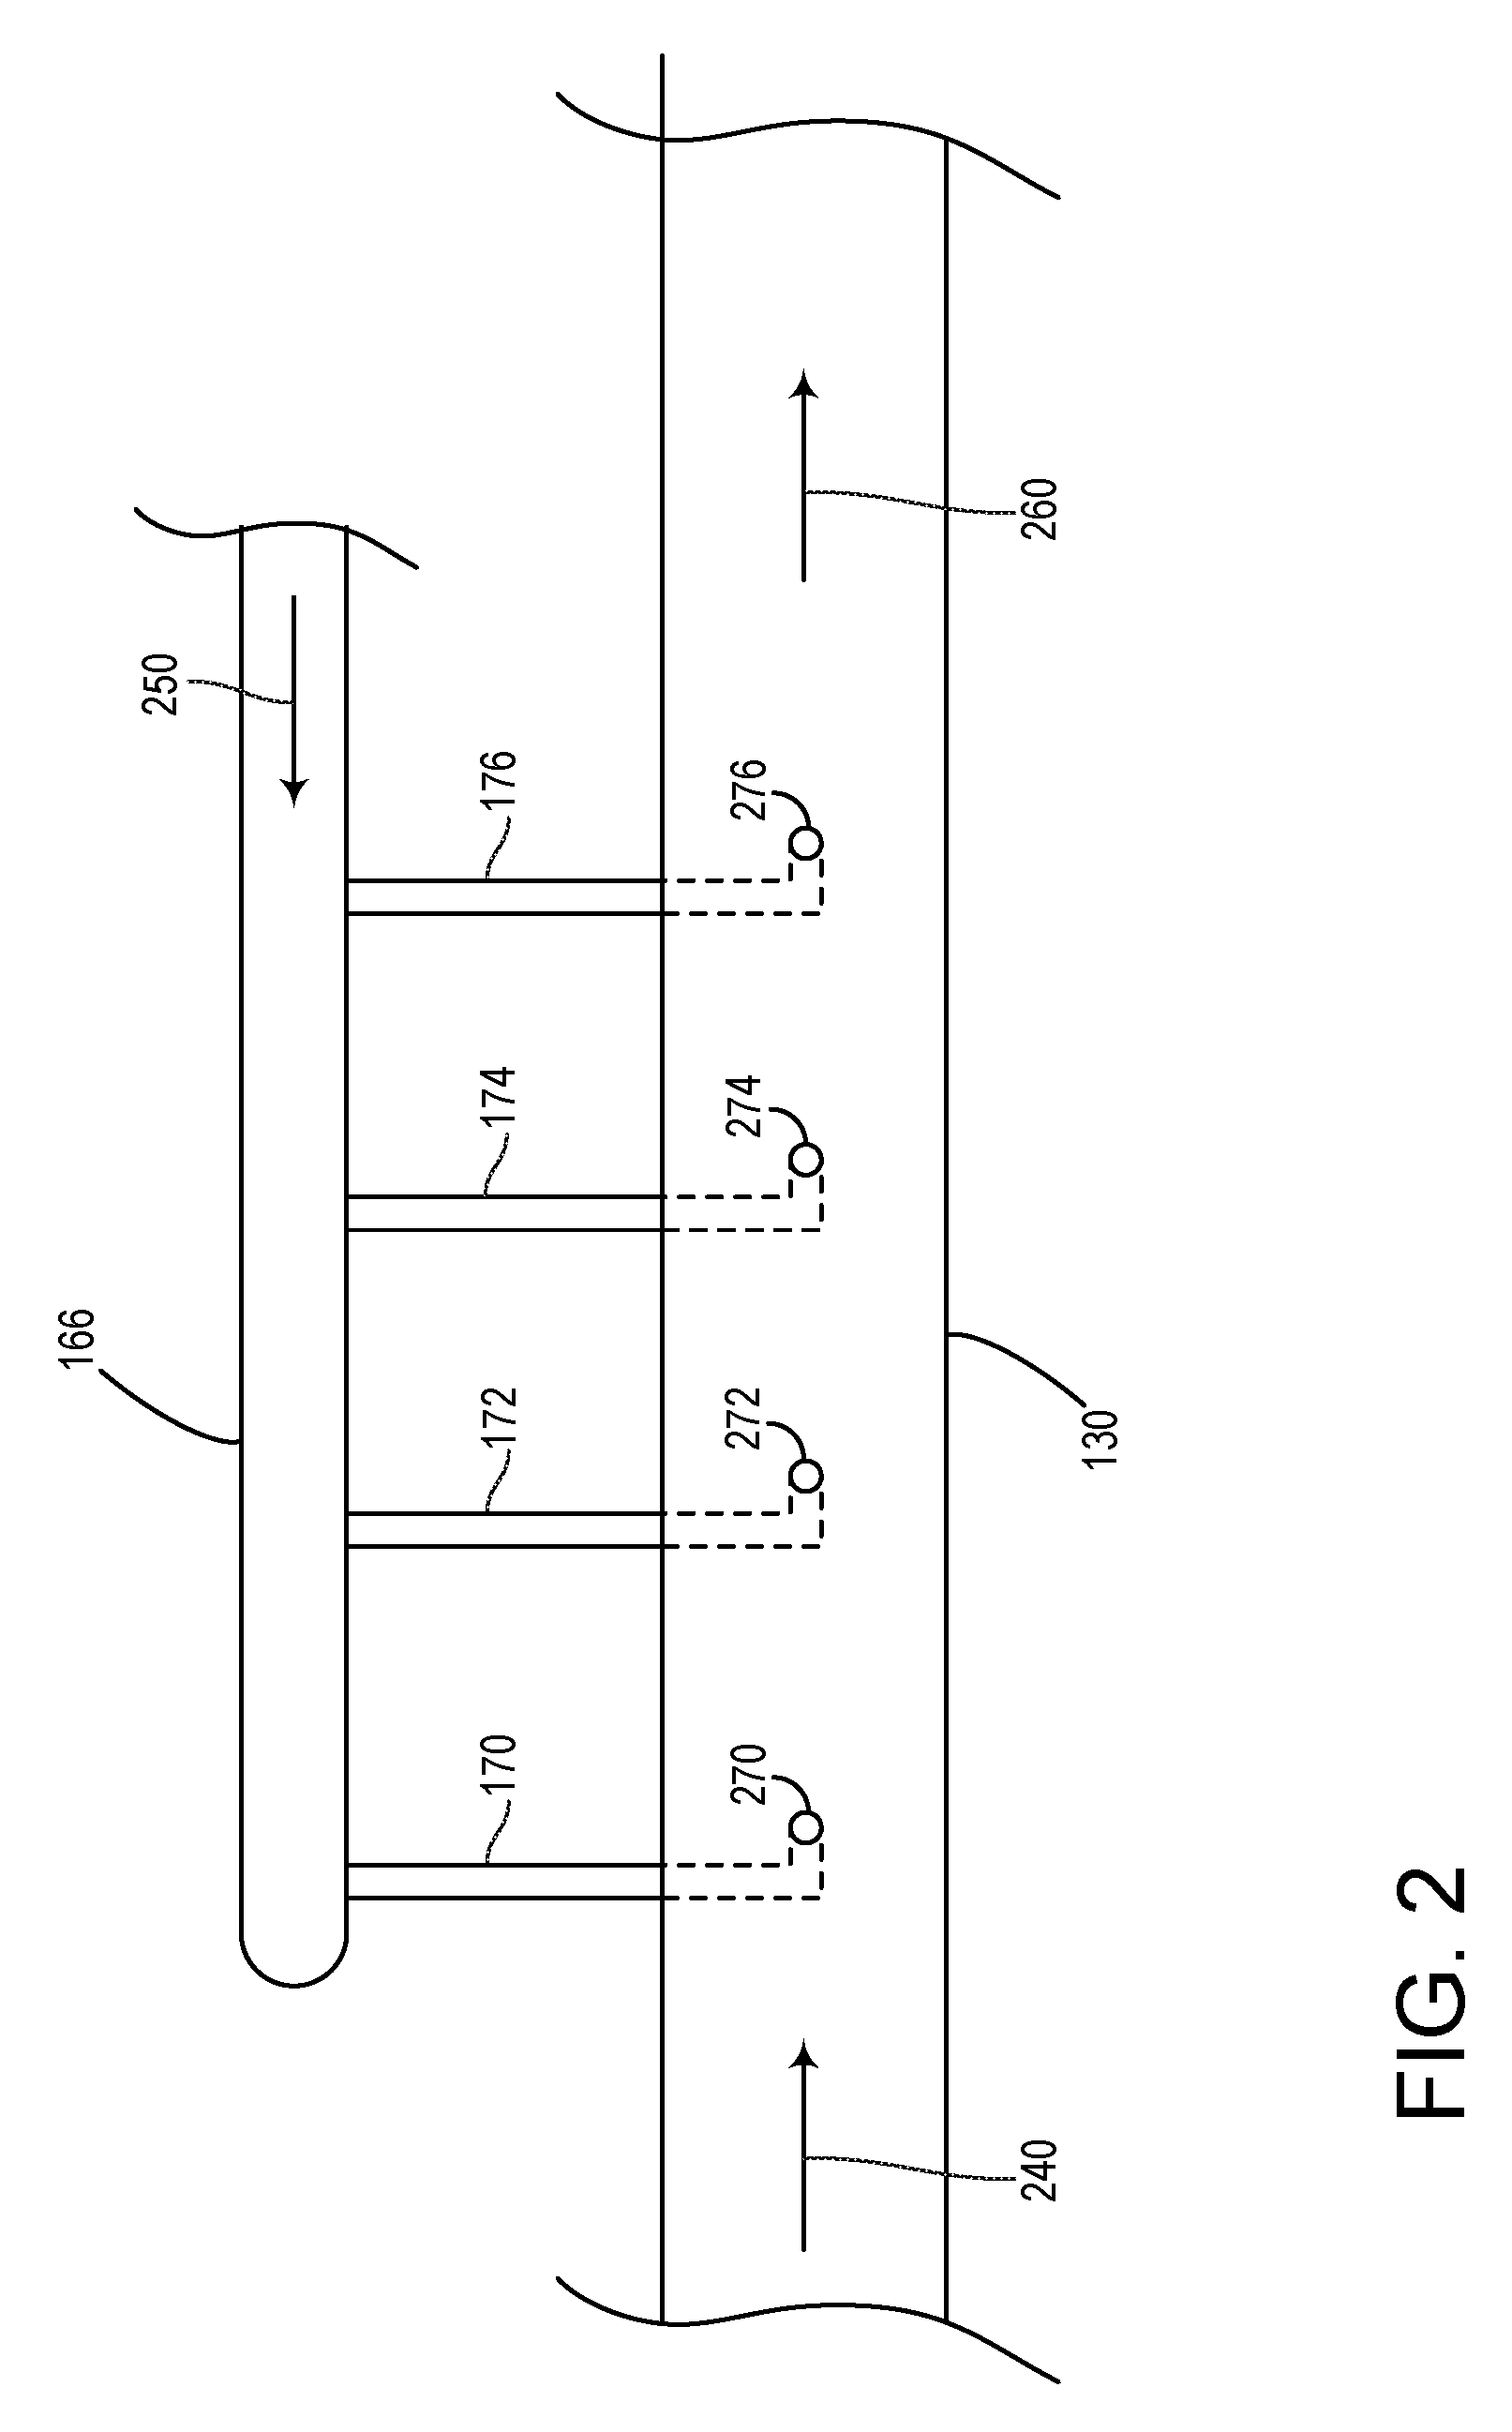 Systems and methods for exhaust gas recirculation